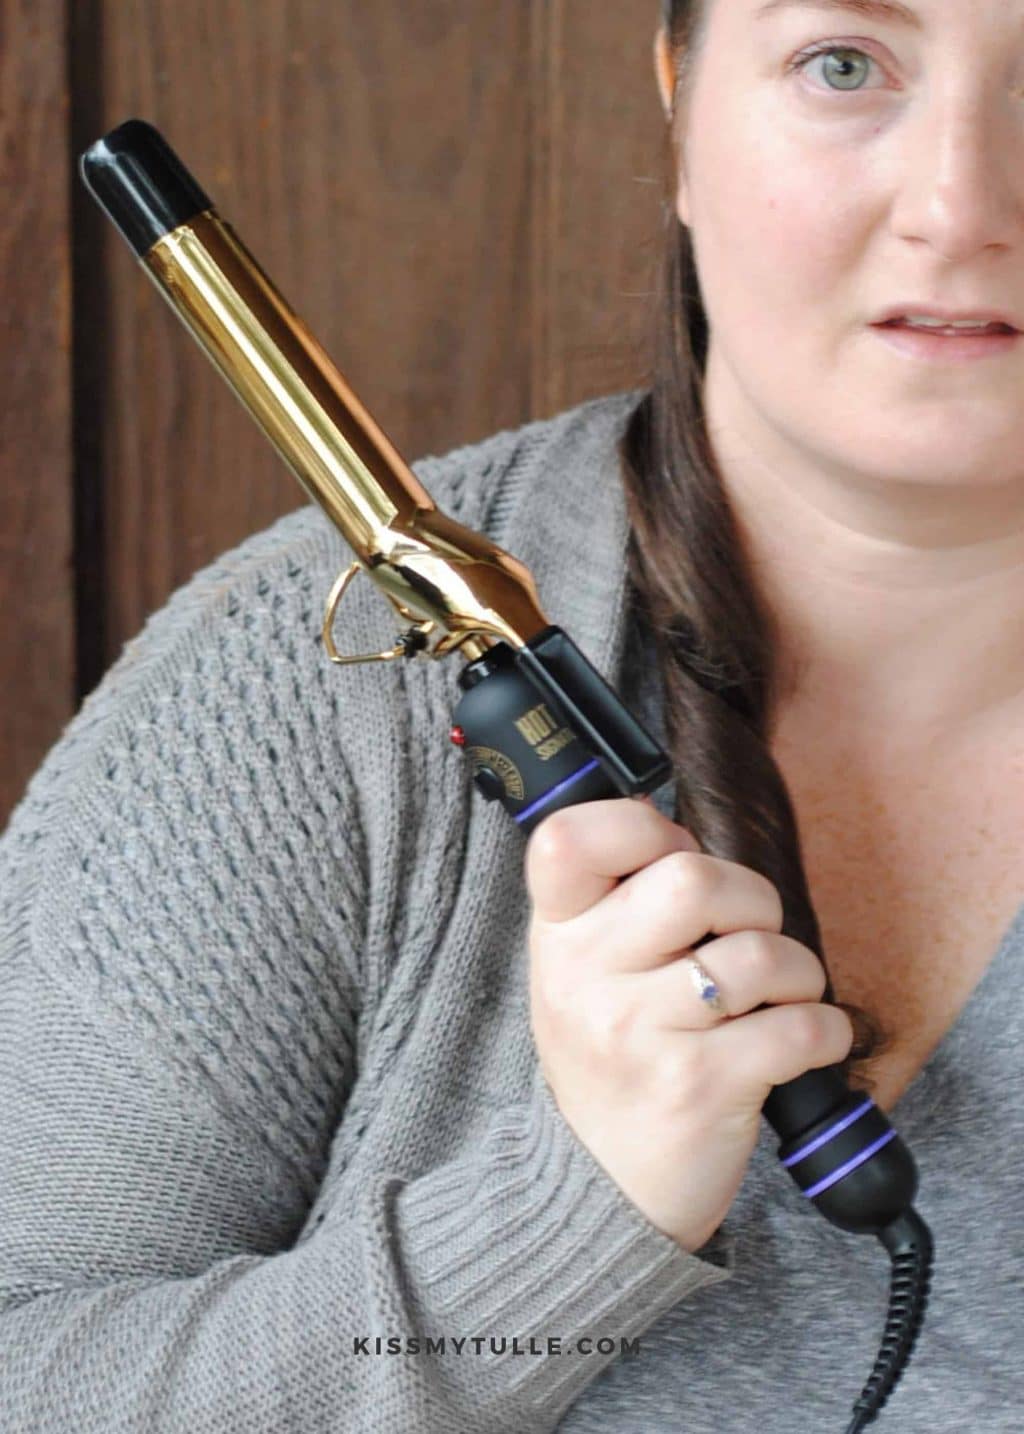 #AD It took me a while but, armed with my trusty Hot Tools Signature Series curling iron, I have figured out a 5 minute hair routine that is easy, simple to do, and looks polished yet casual. And I wanna share it with you: